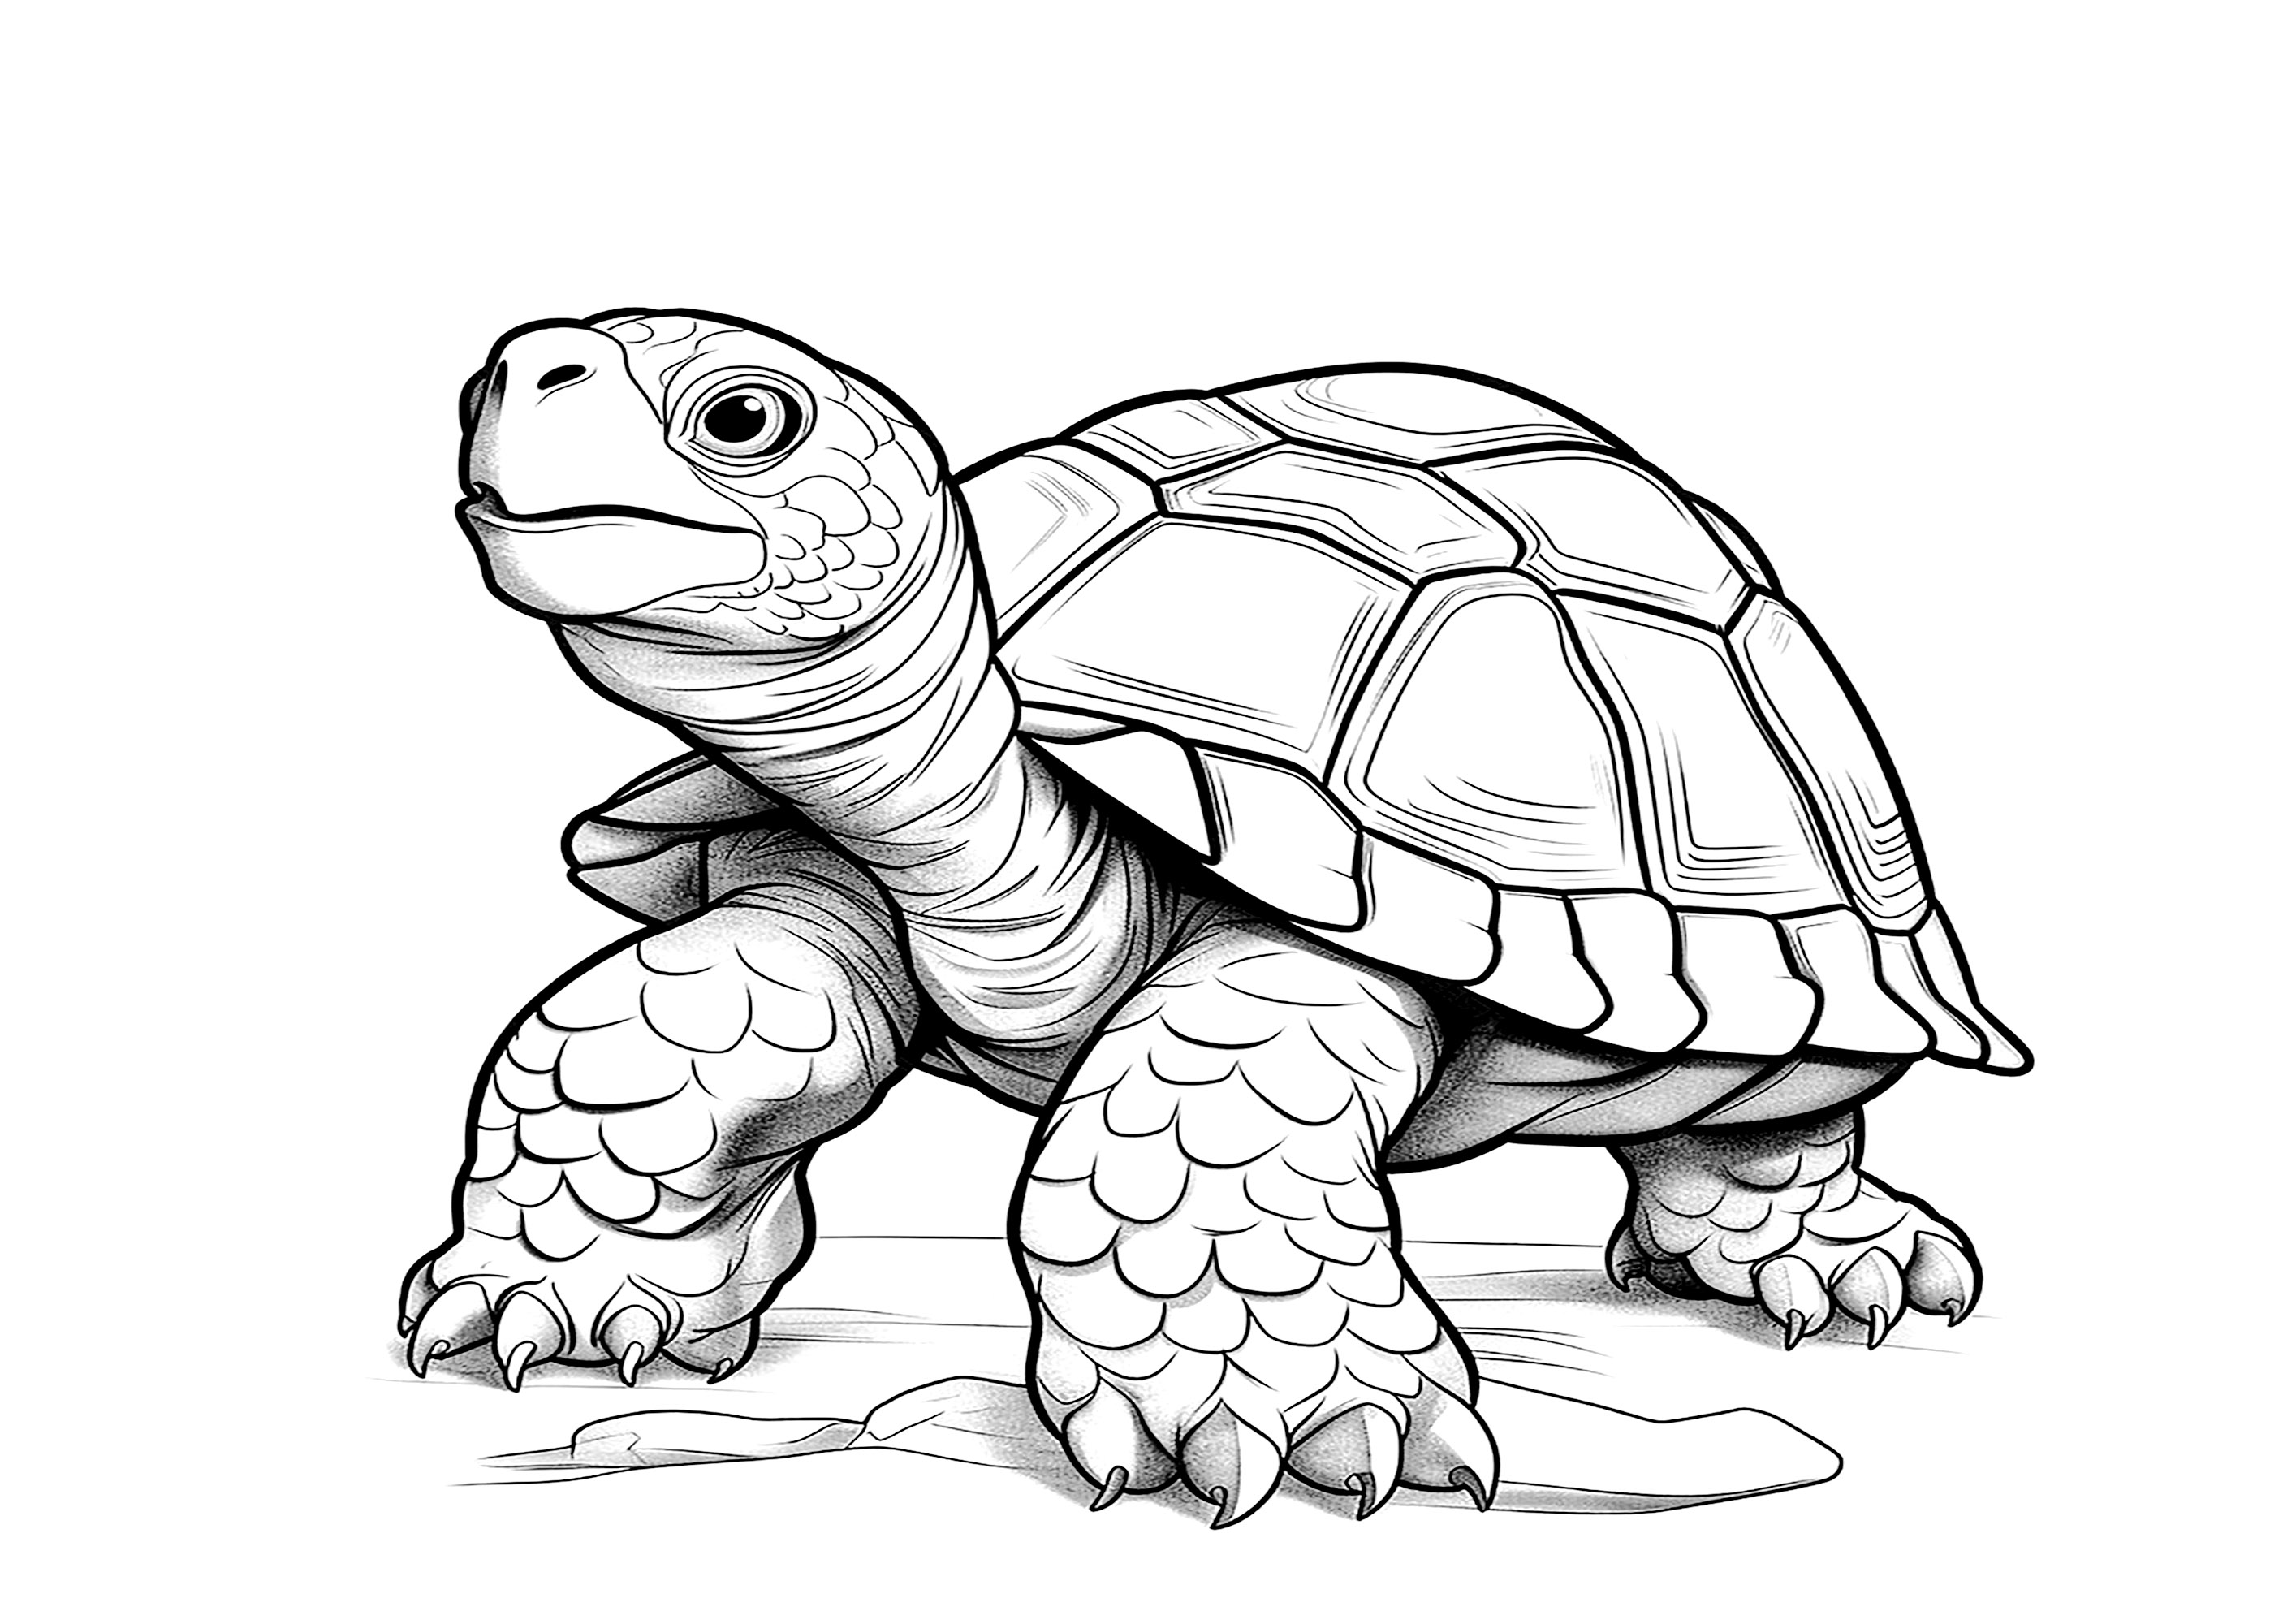 How to Draw a Tortoise - DrawingNow